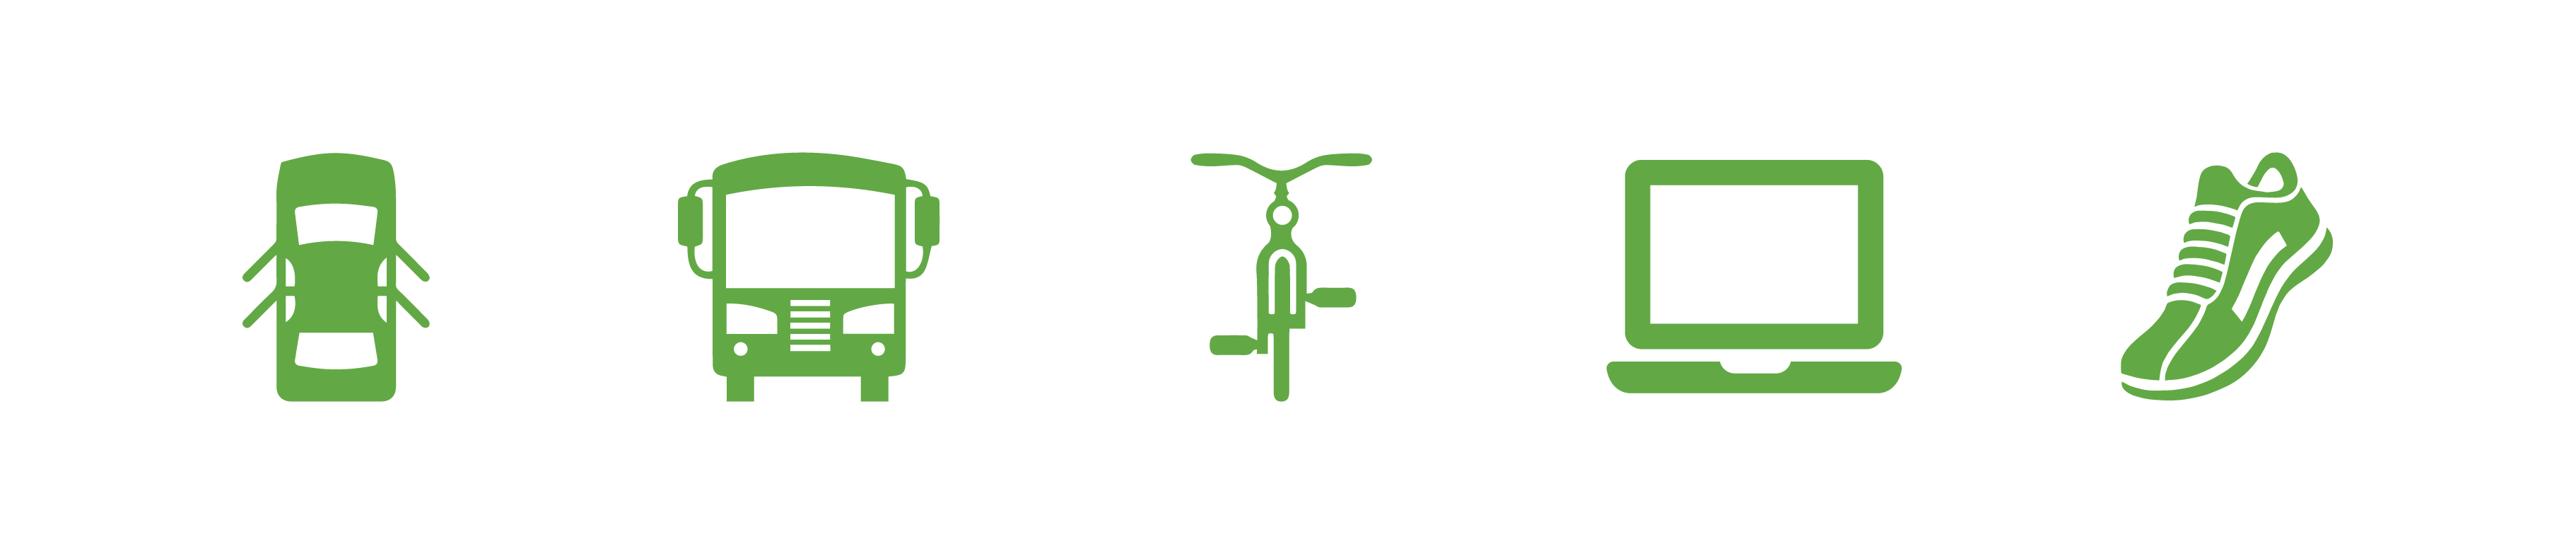 Smart Commute Icons